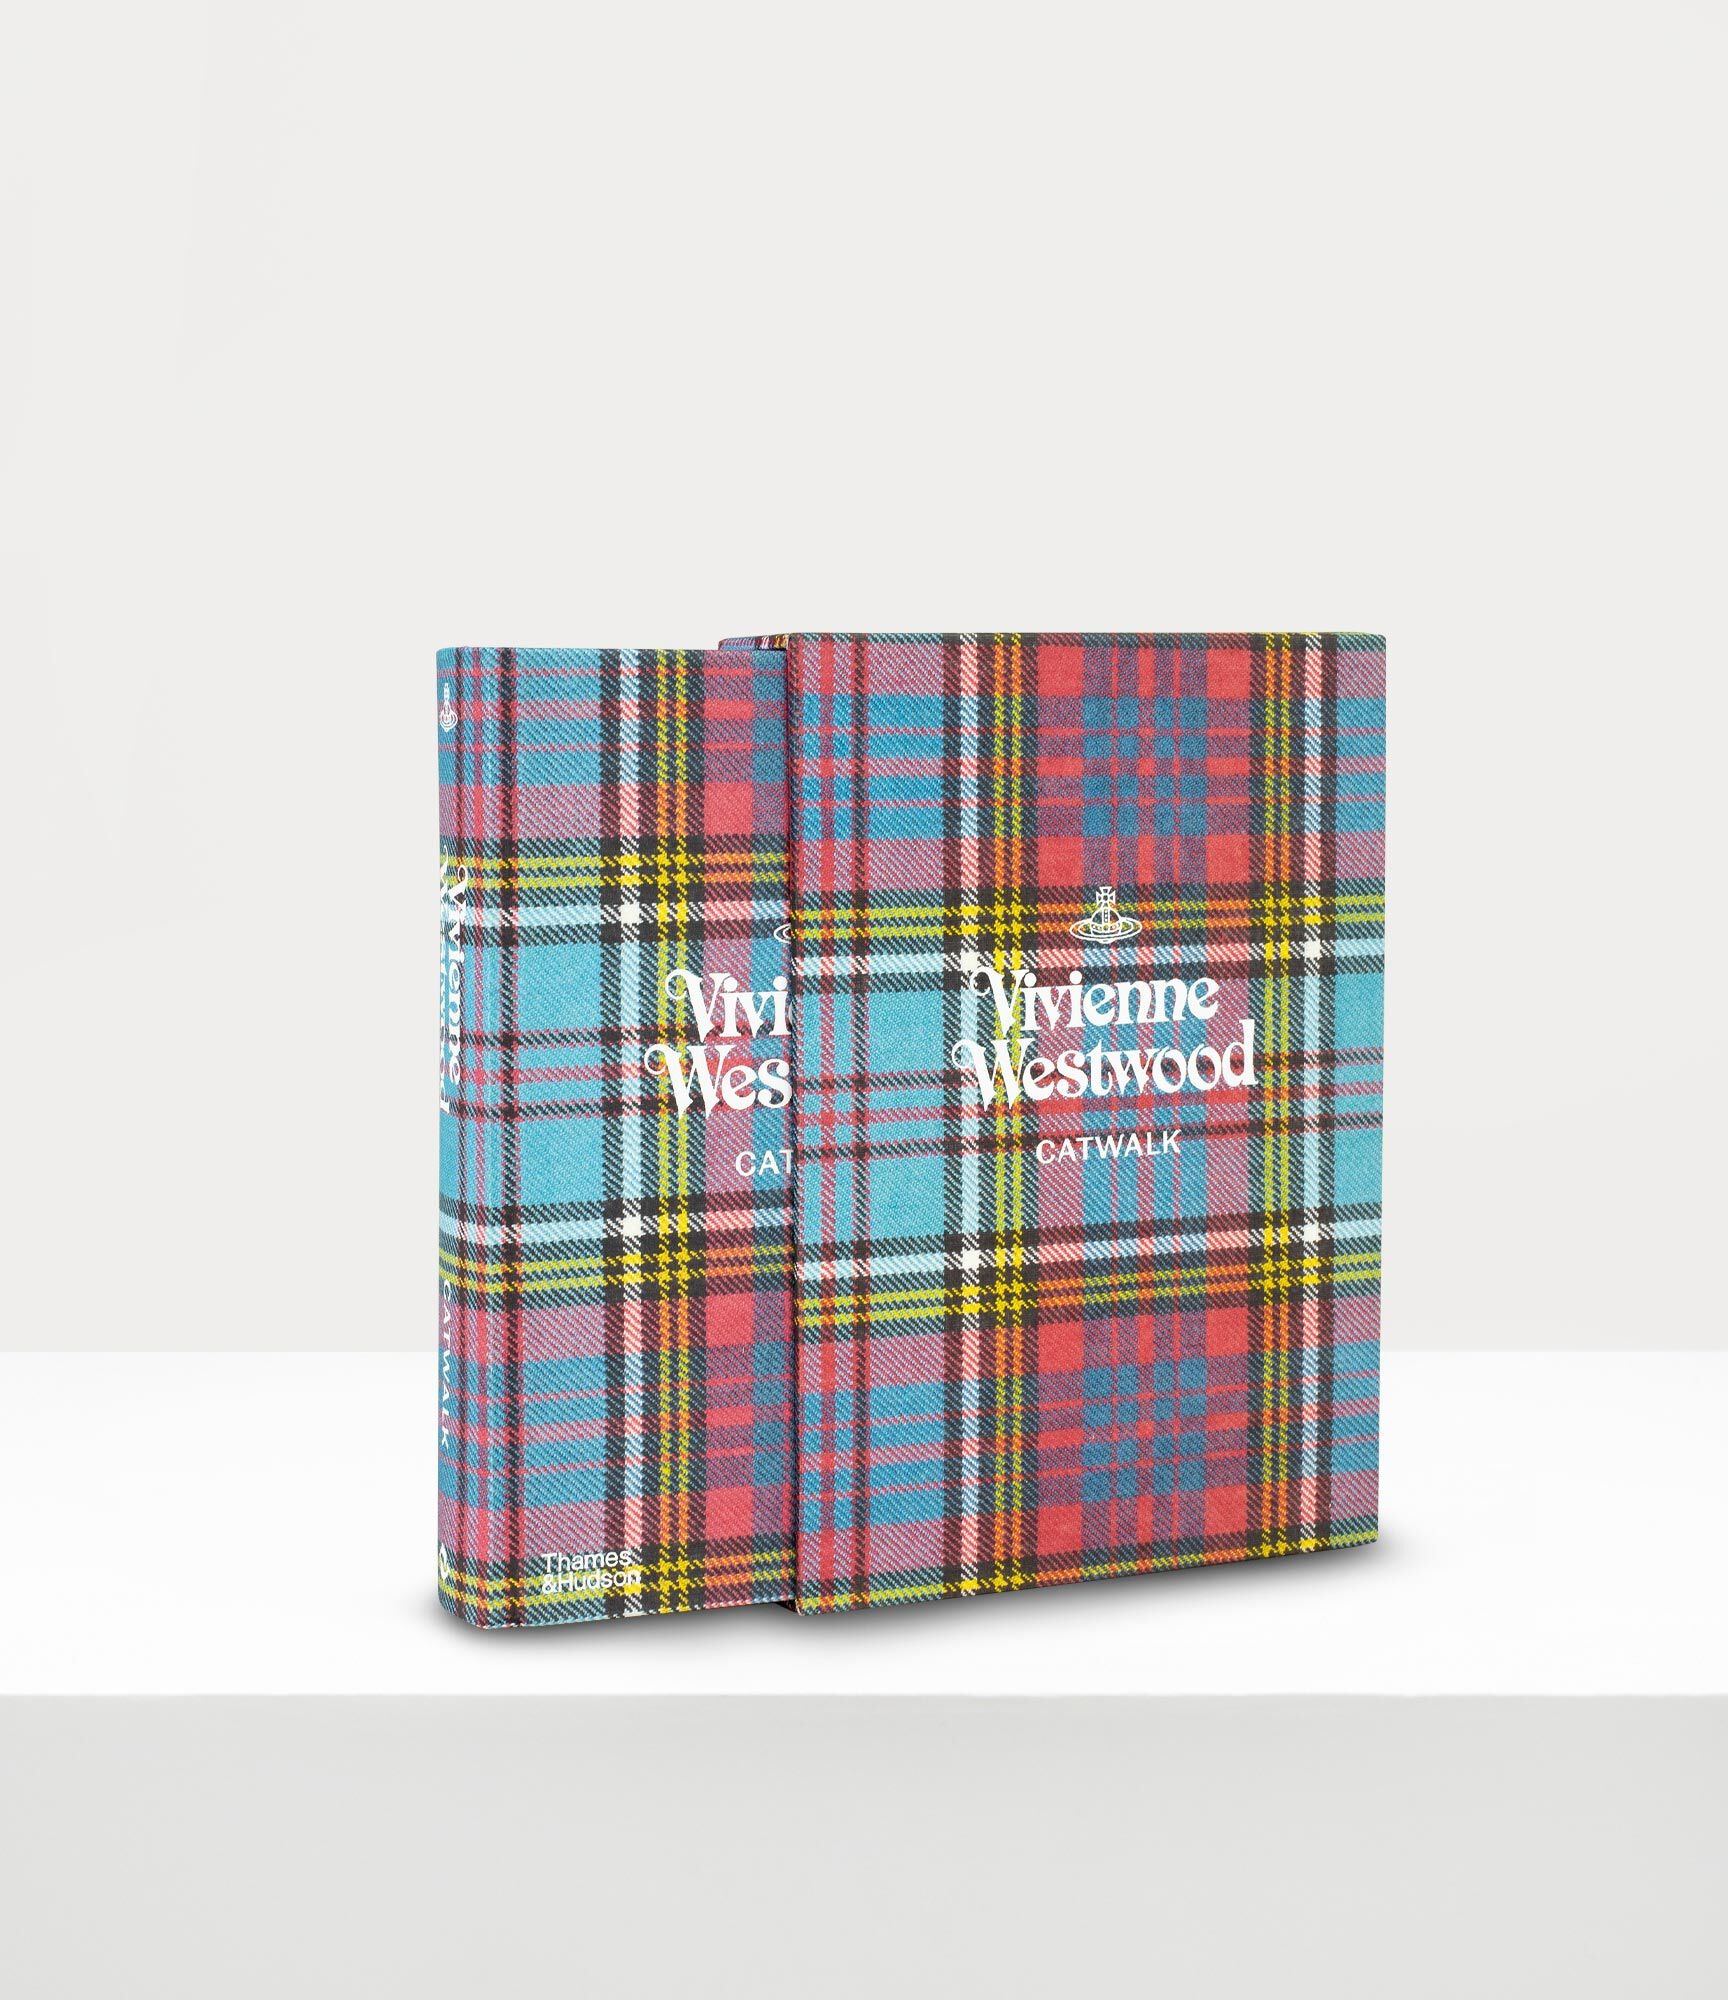 LIMITED EDITION VIVIENNE WESTWOOD CATWALK: THE COMPLETE COLLECTIONS - 2